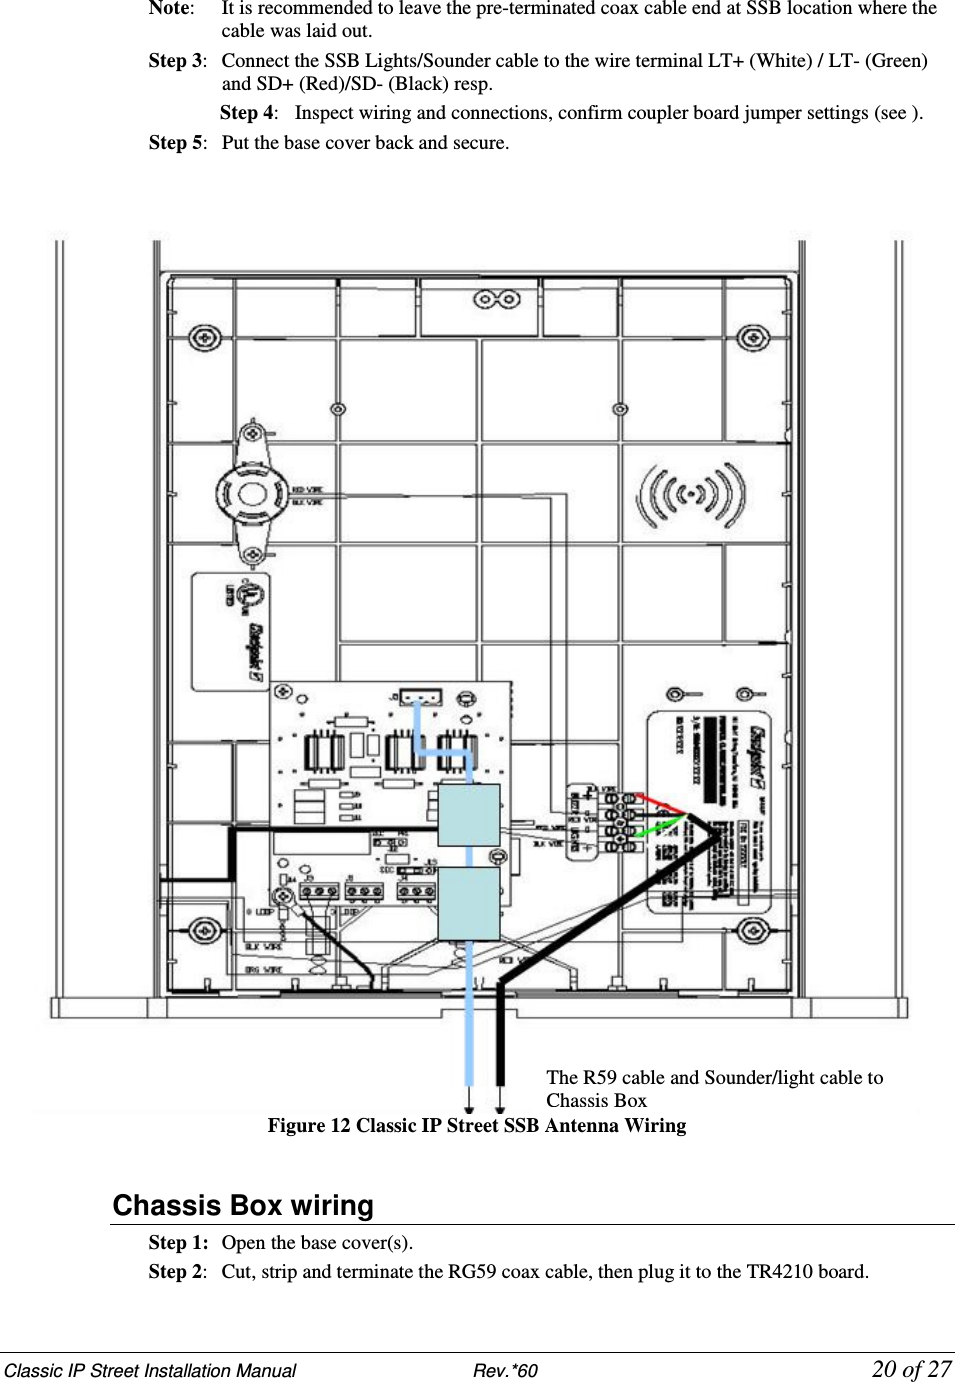 Classic IP Street Installation Manual                           Rev.*60            20 of 27 Note:   It is recommended to leave the pre-terminated coax cable end at SSB location where the cable was laid out. Step 3:   Connect the SSB Lights/Sounder cable to the wire terminal LT+ (White) / LT- (Green) and SD+ (Red)/SD- (Black) resp. Step 4:   Inspect wiring and connections, confirm coupler board jumper settings (see ). Step 5:  Put the base cover back and secure.    Figure 12 Classic IP Street SSB Antenna Wiring  Chassis Box wiring Step 1:  Open the base cover(s). Step 2:  Cut, strip and terminate the RG59 coax cable, then plug it to the TR4210 board. The R59 cable and Sounder/light cable to Chassis Box 